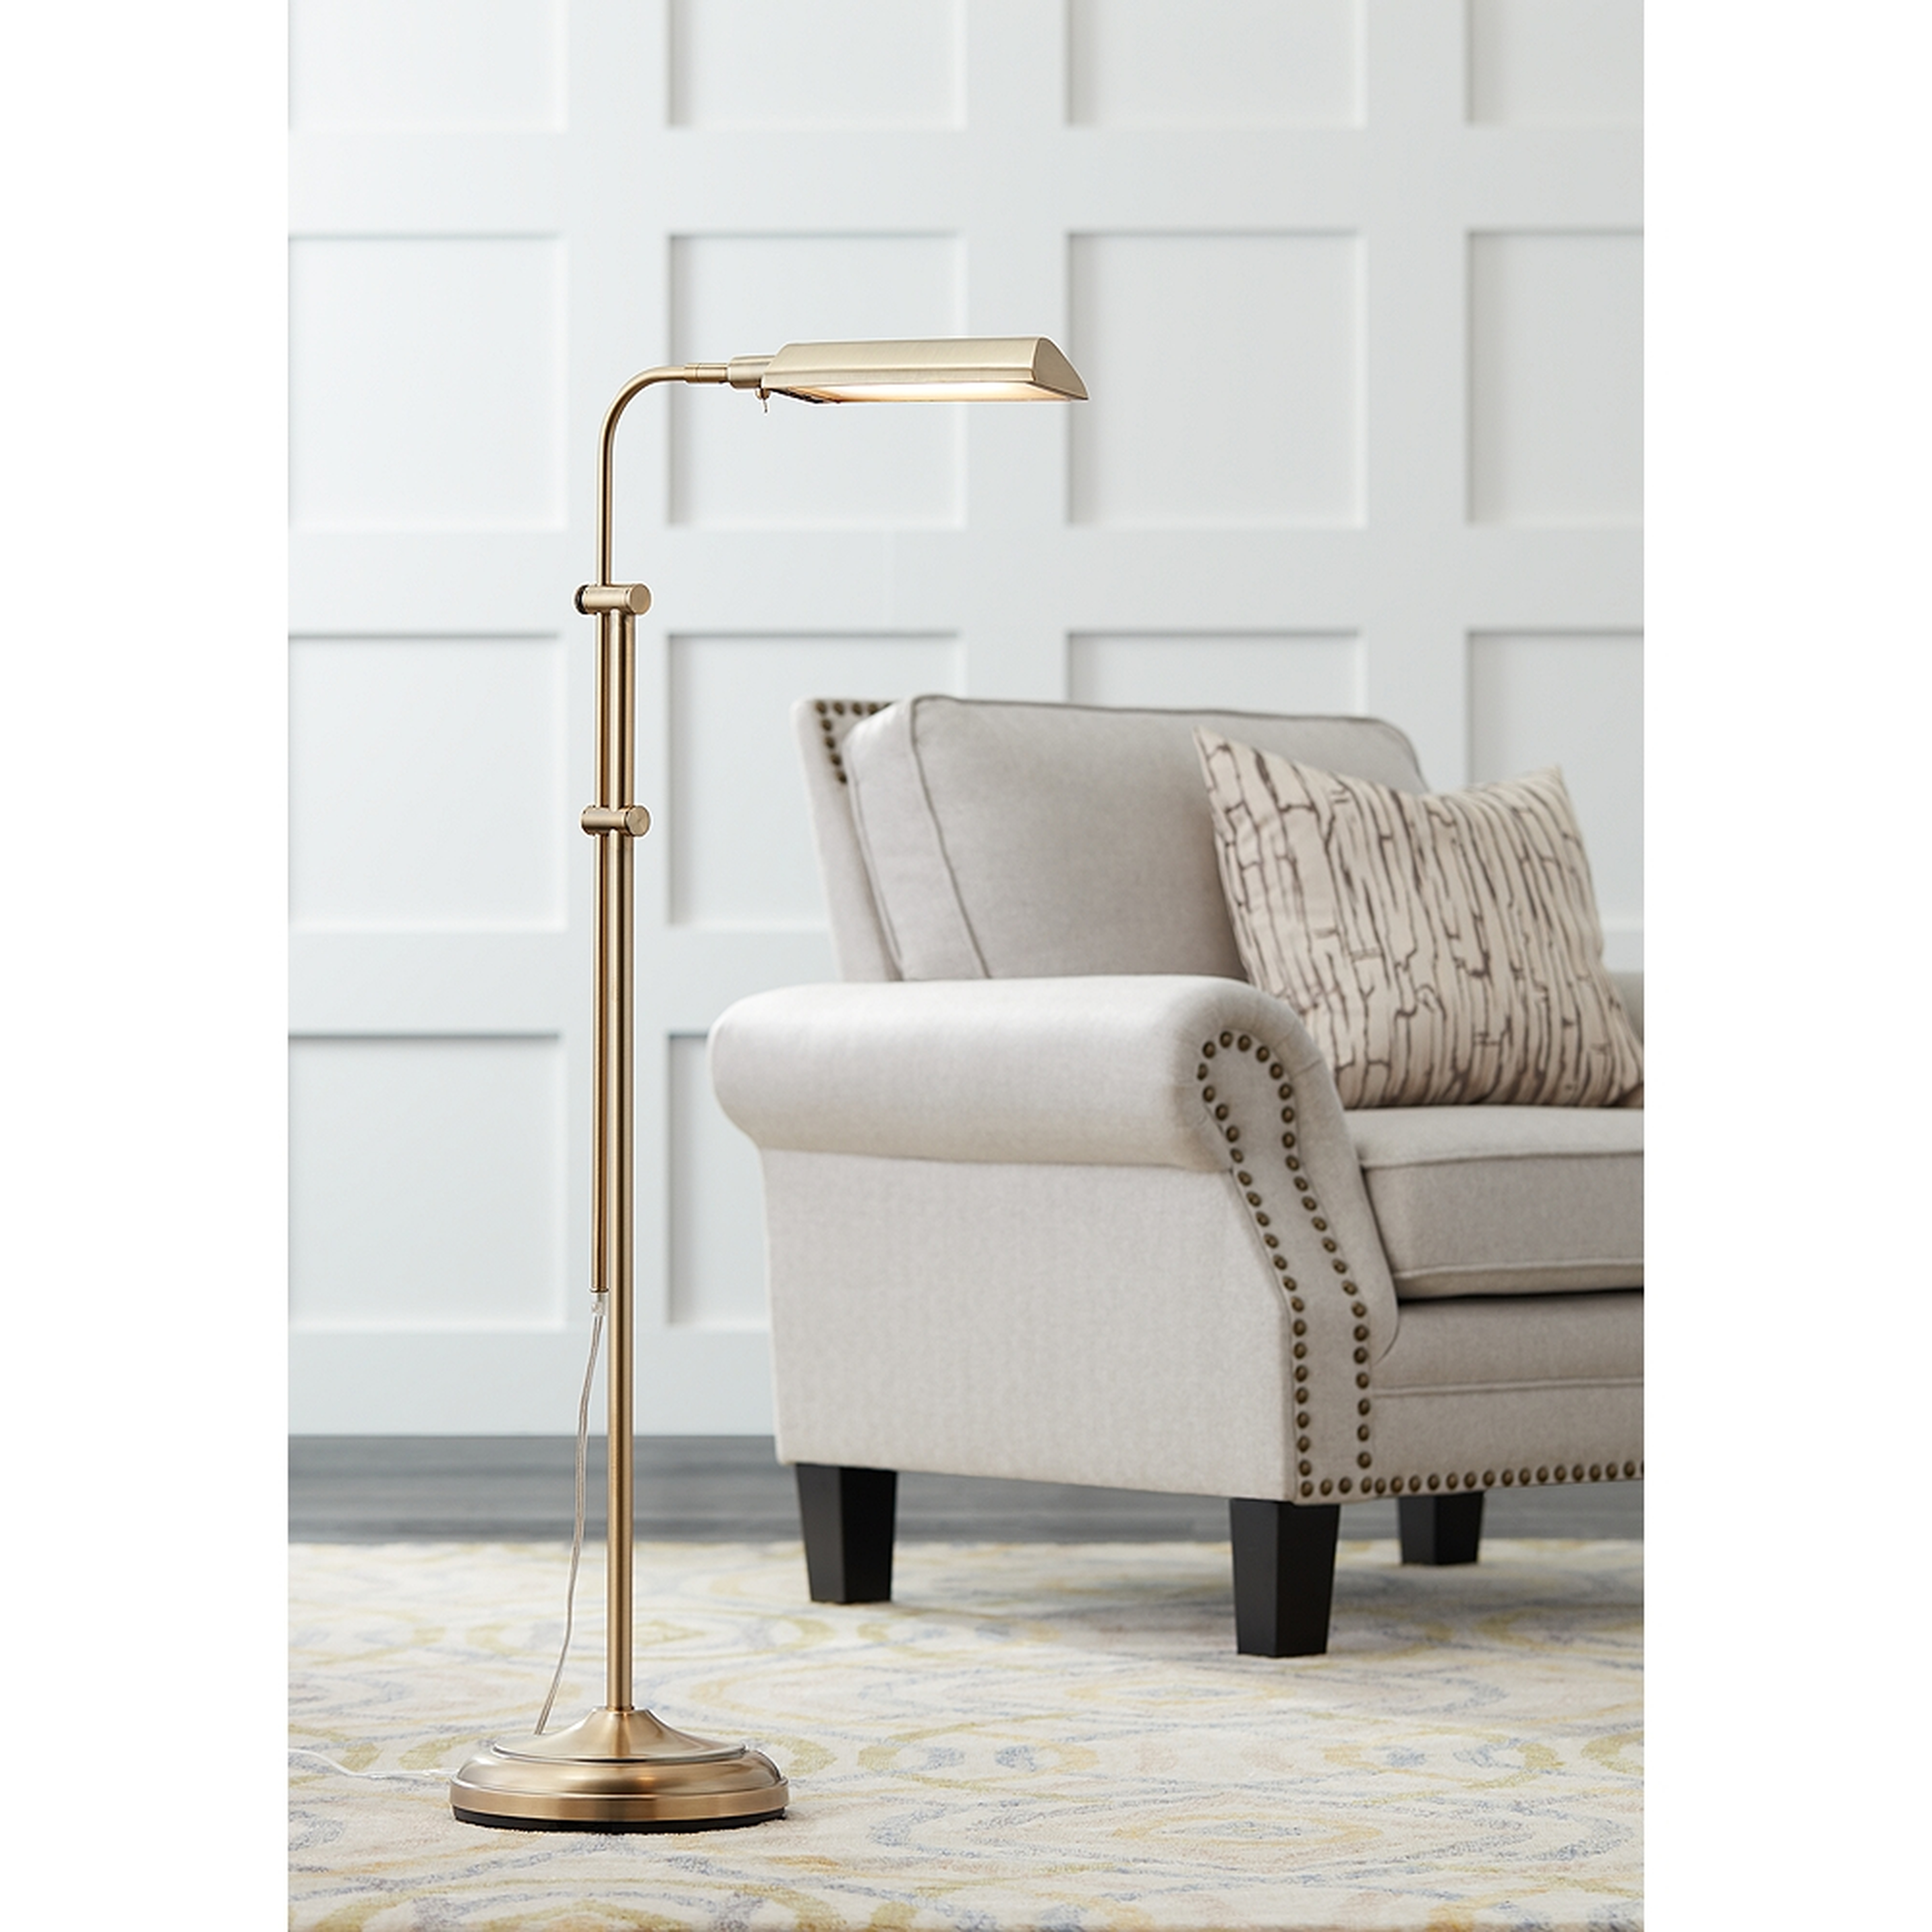 Culver Plated Aged Brass Adjustable LED Floor Lamp - Style # 23R26 - Lamps Plus